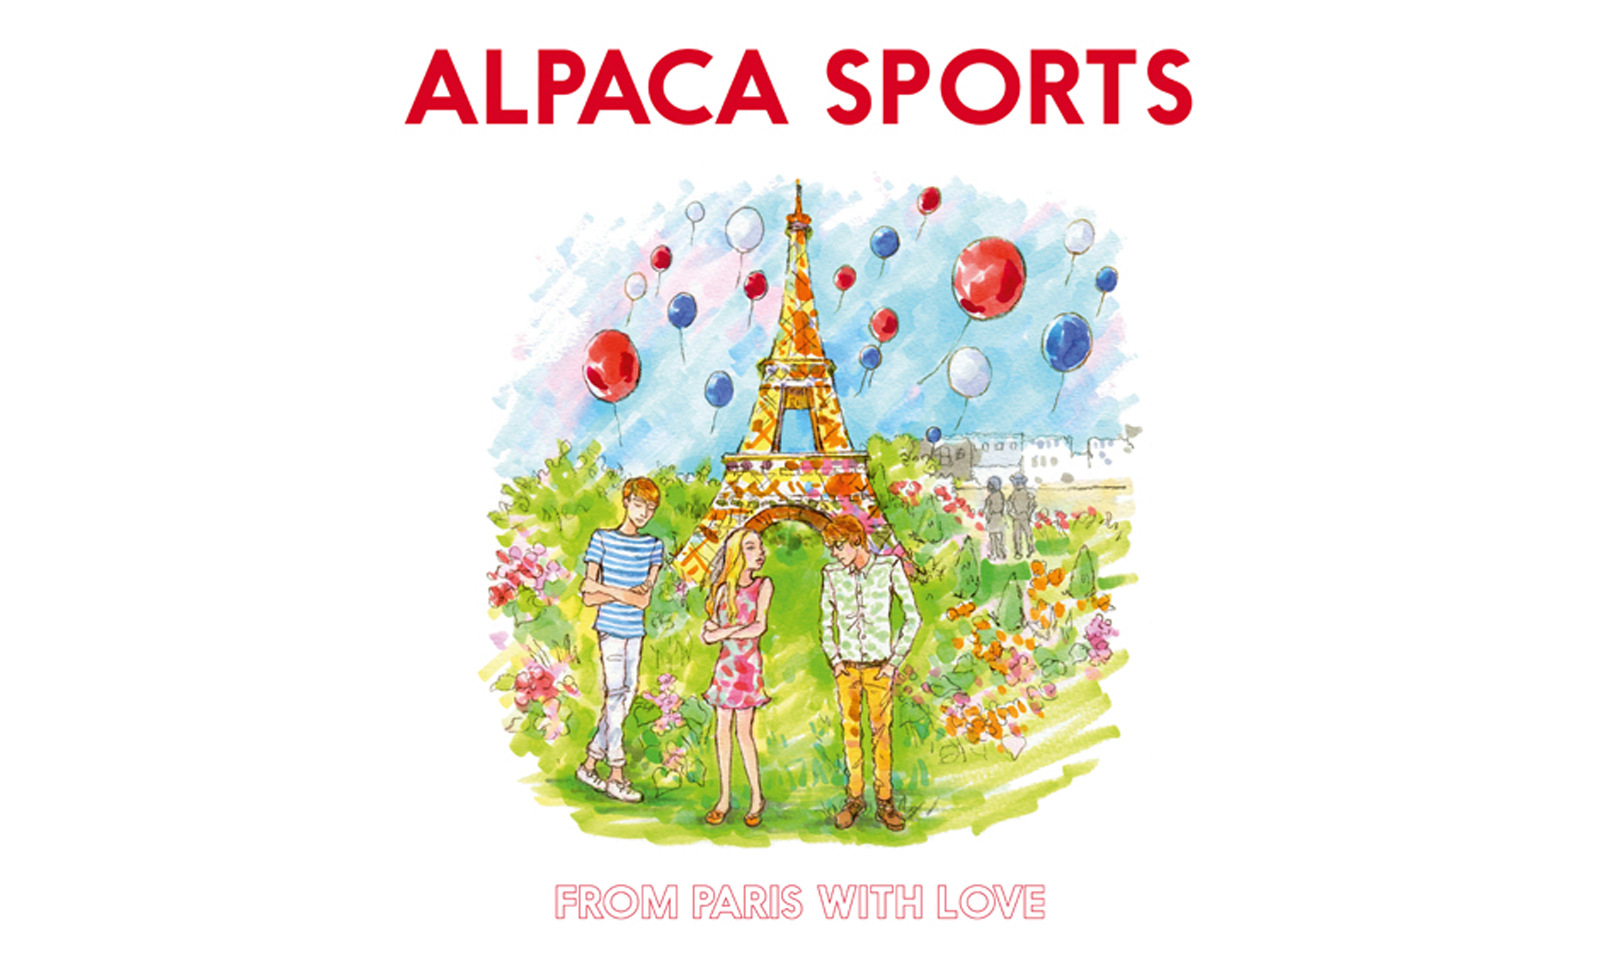 “From Paris With Love” by ALPACA SPORTS